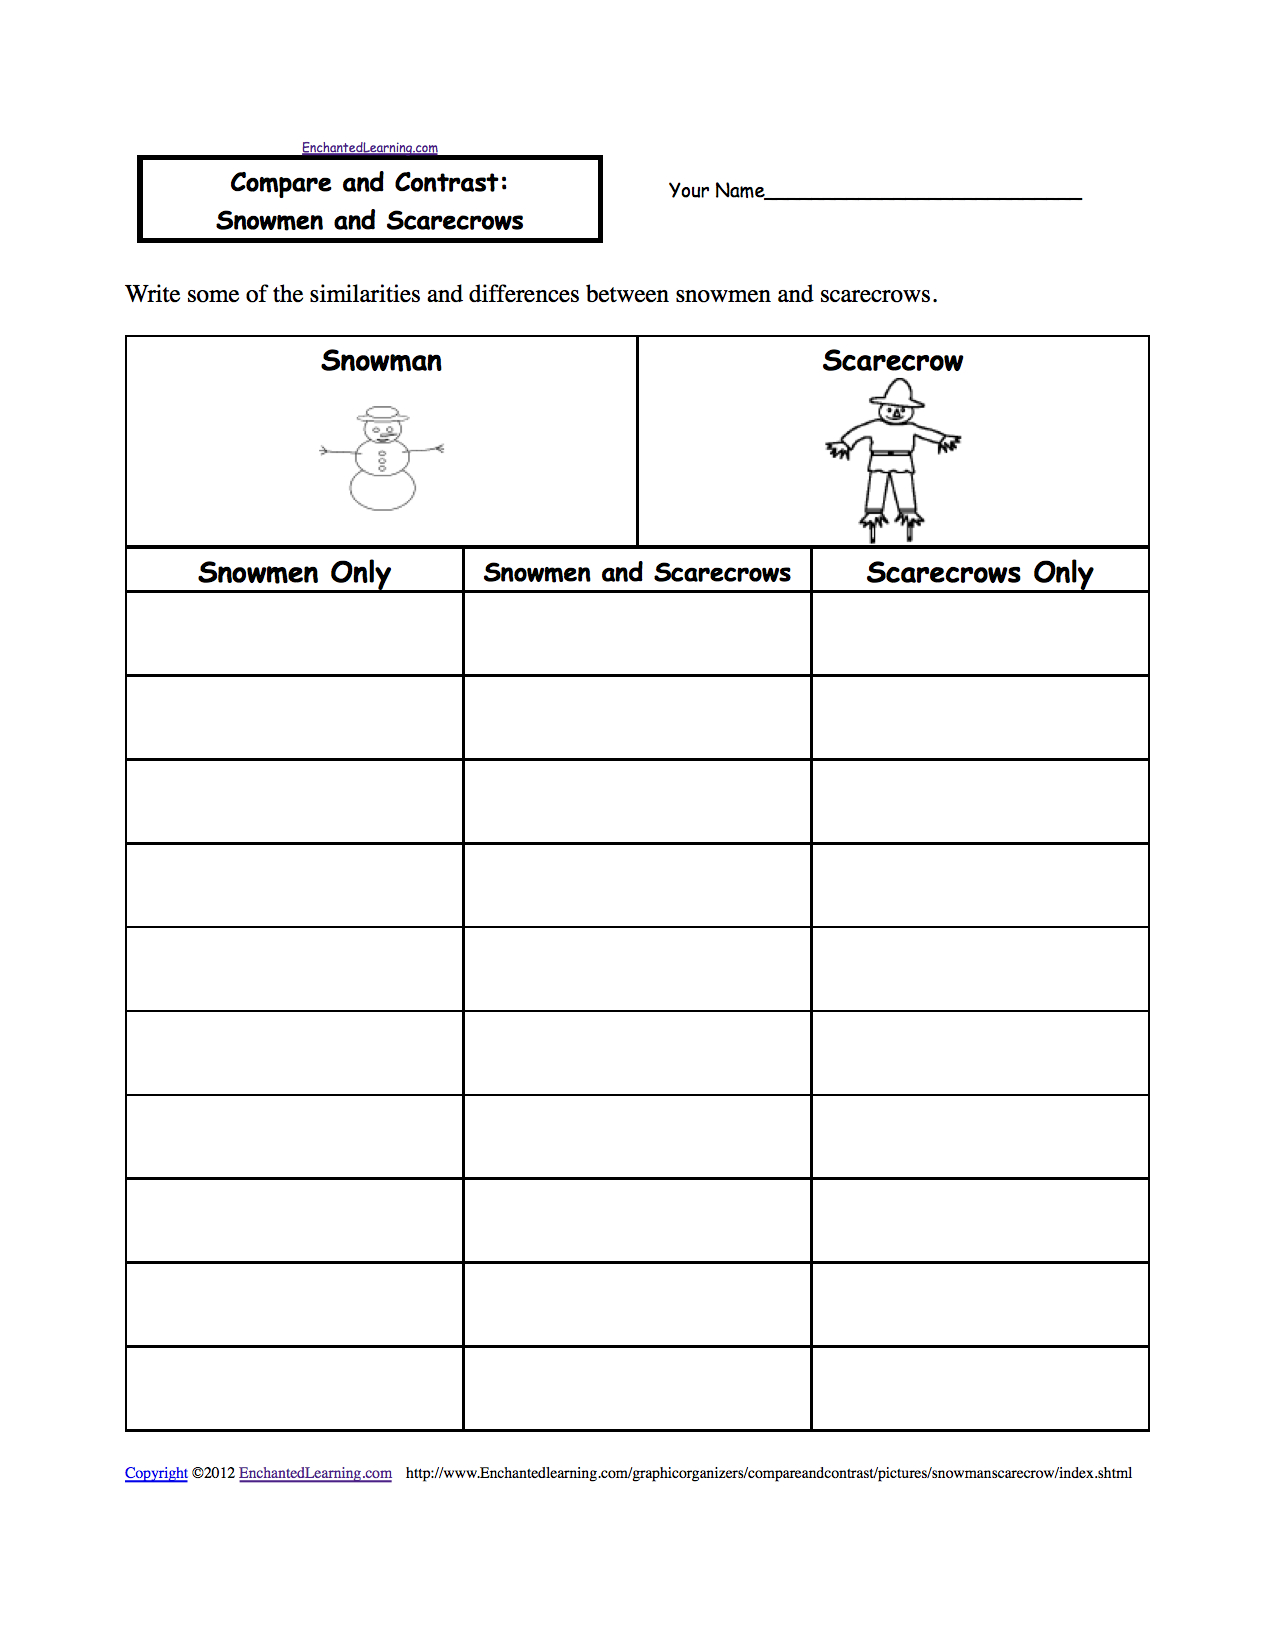 Compare And Contrast Worksheets To Print - Enchantedlearning - Free Printable Compare And Contrast Graphic Organizer